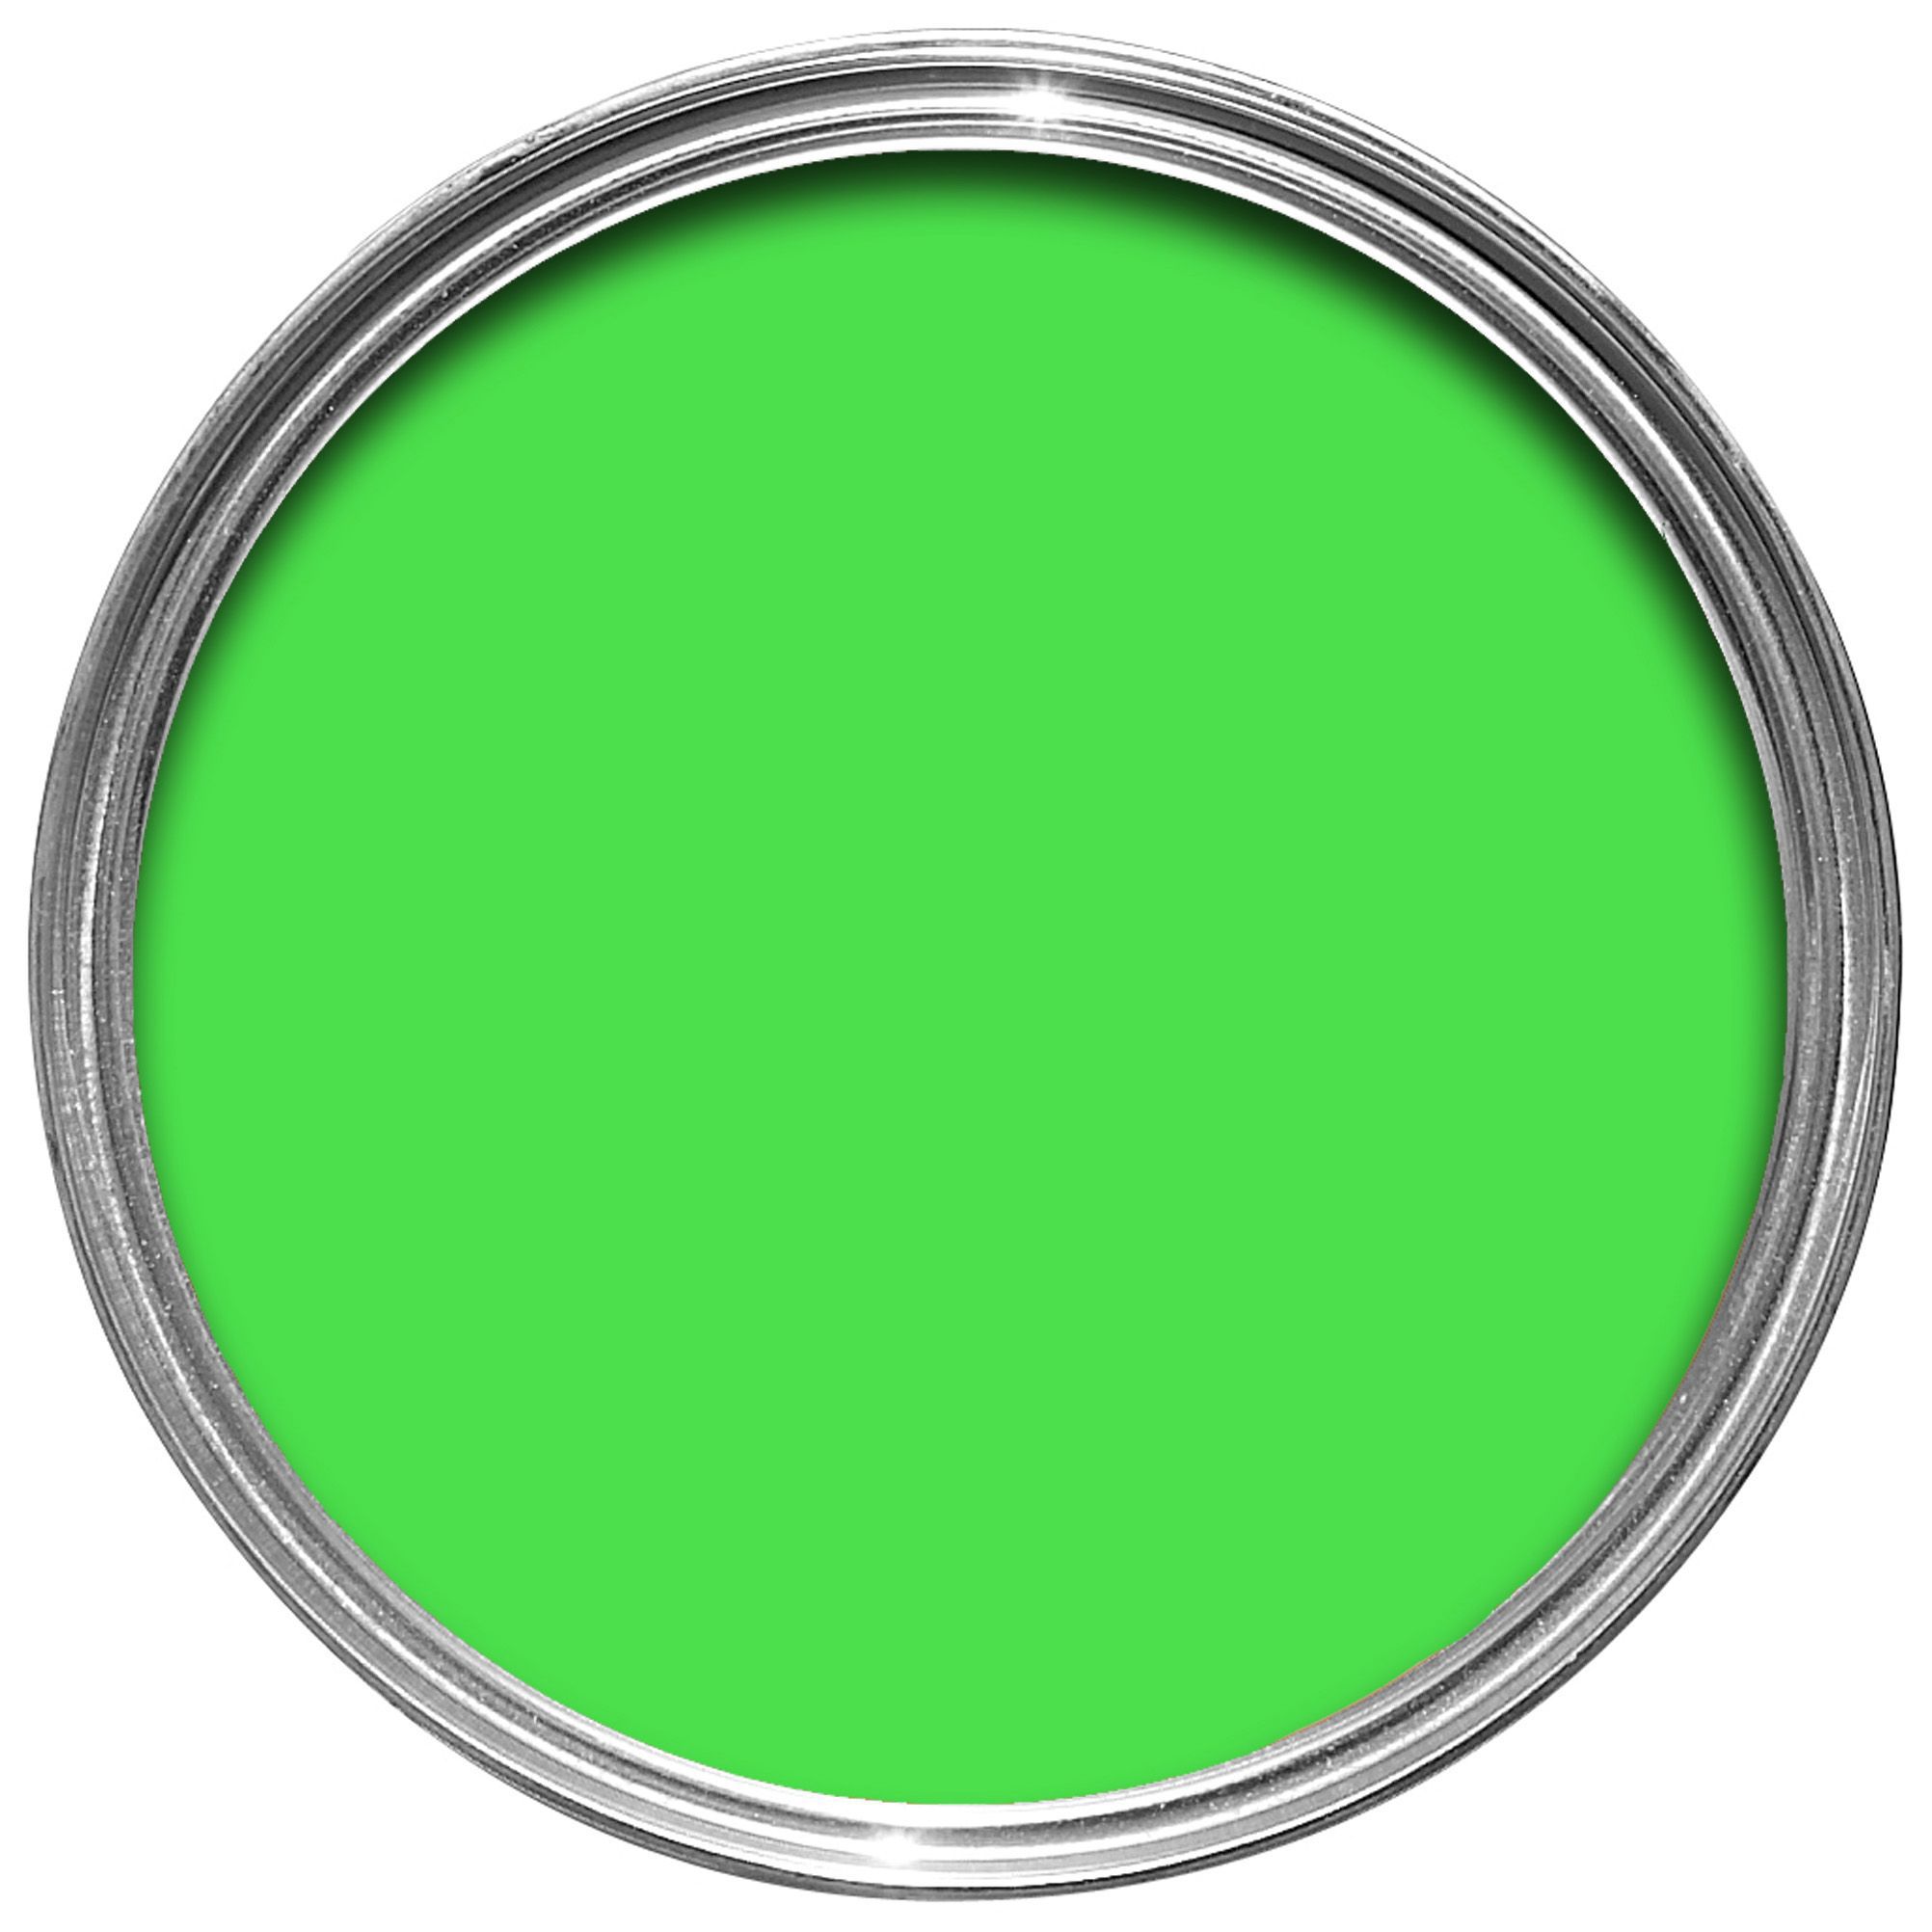 Rust-oleum glow in the dark will work, but you have to paint first with a  neon color such as key lime gloss.